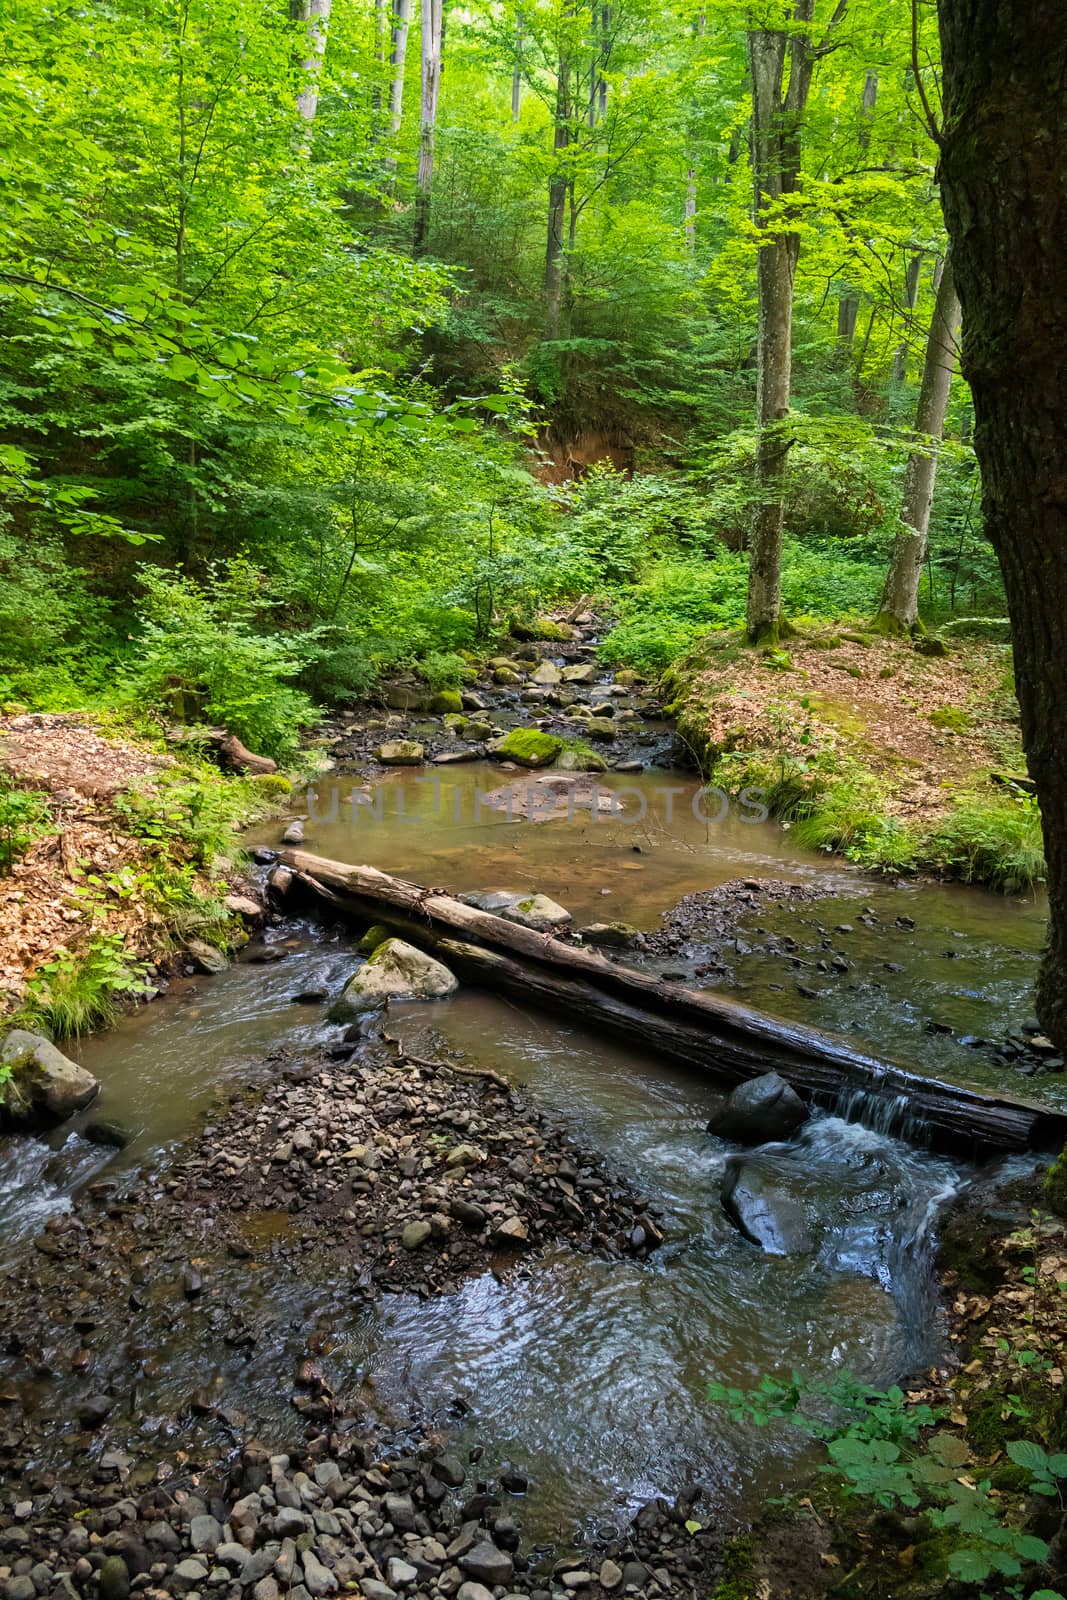 A shallow forest source with stones and a dam in the form of a fallen log